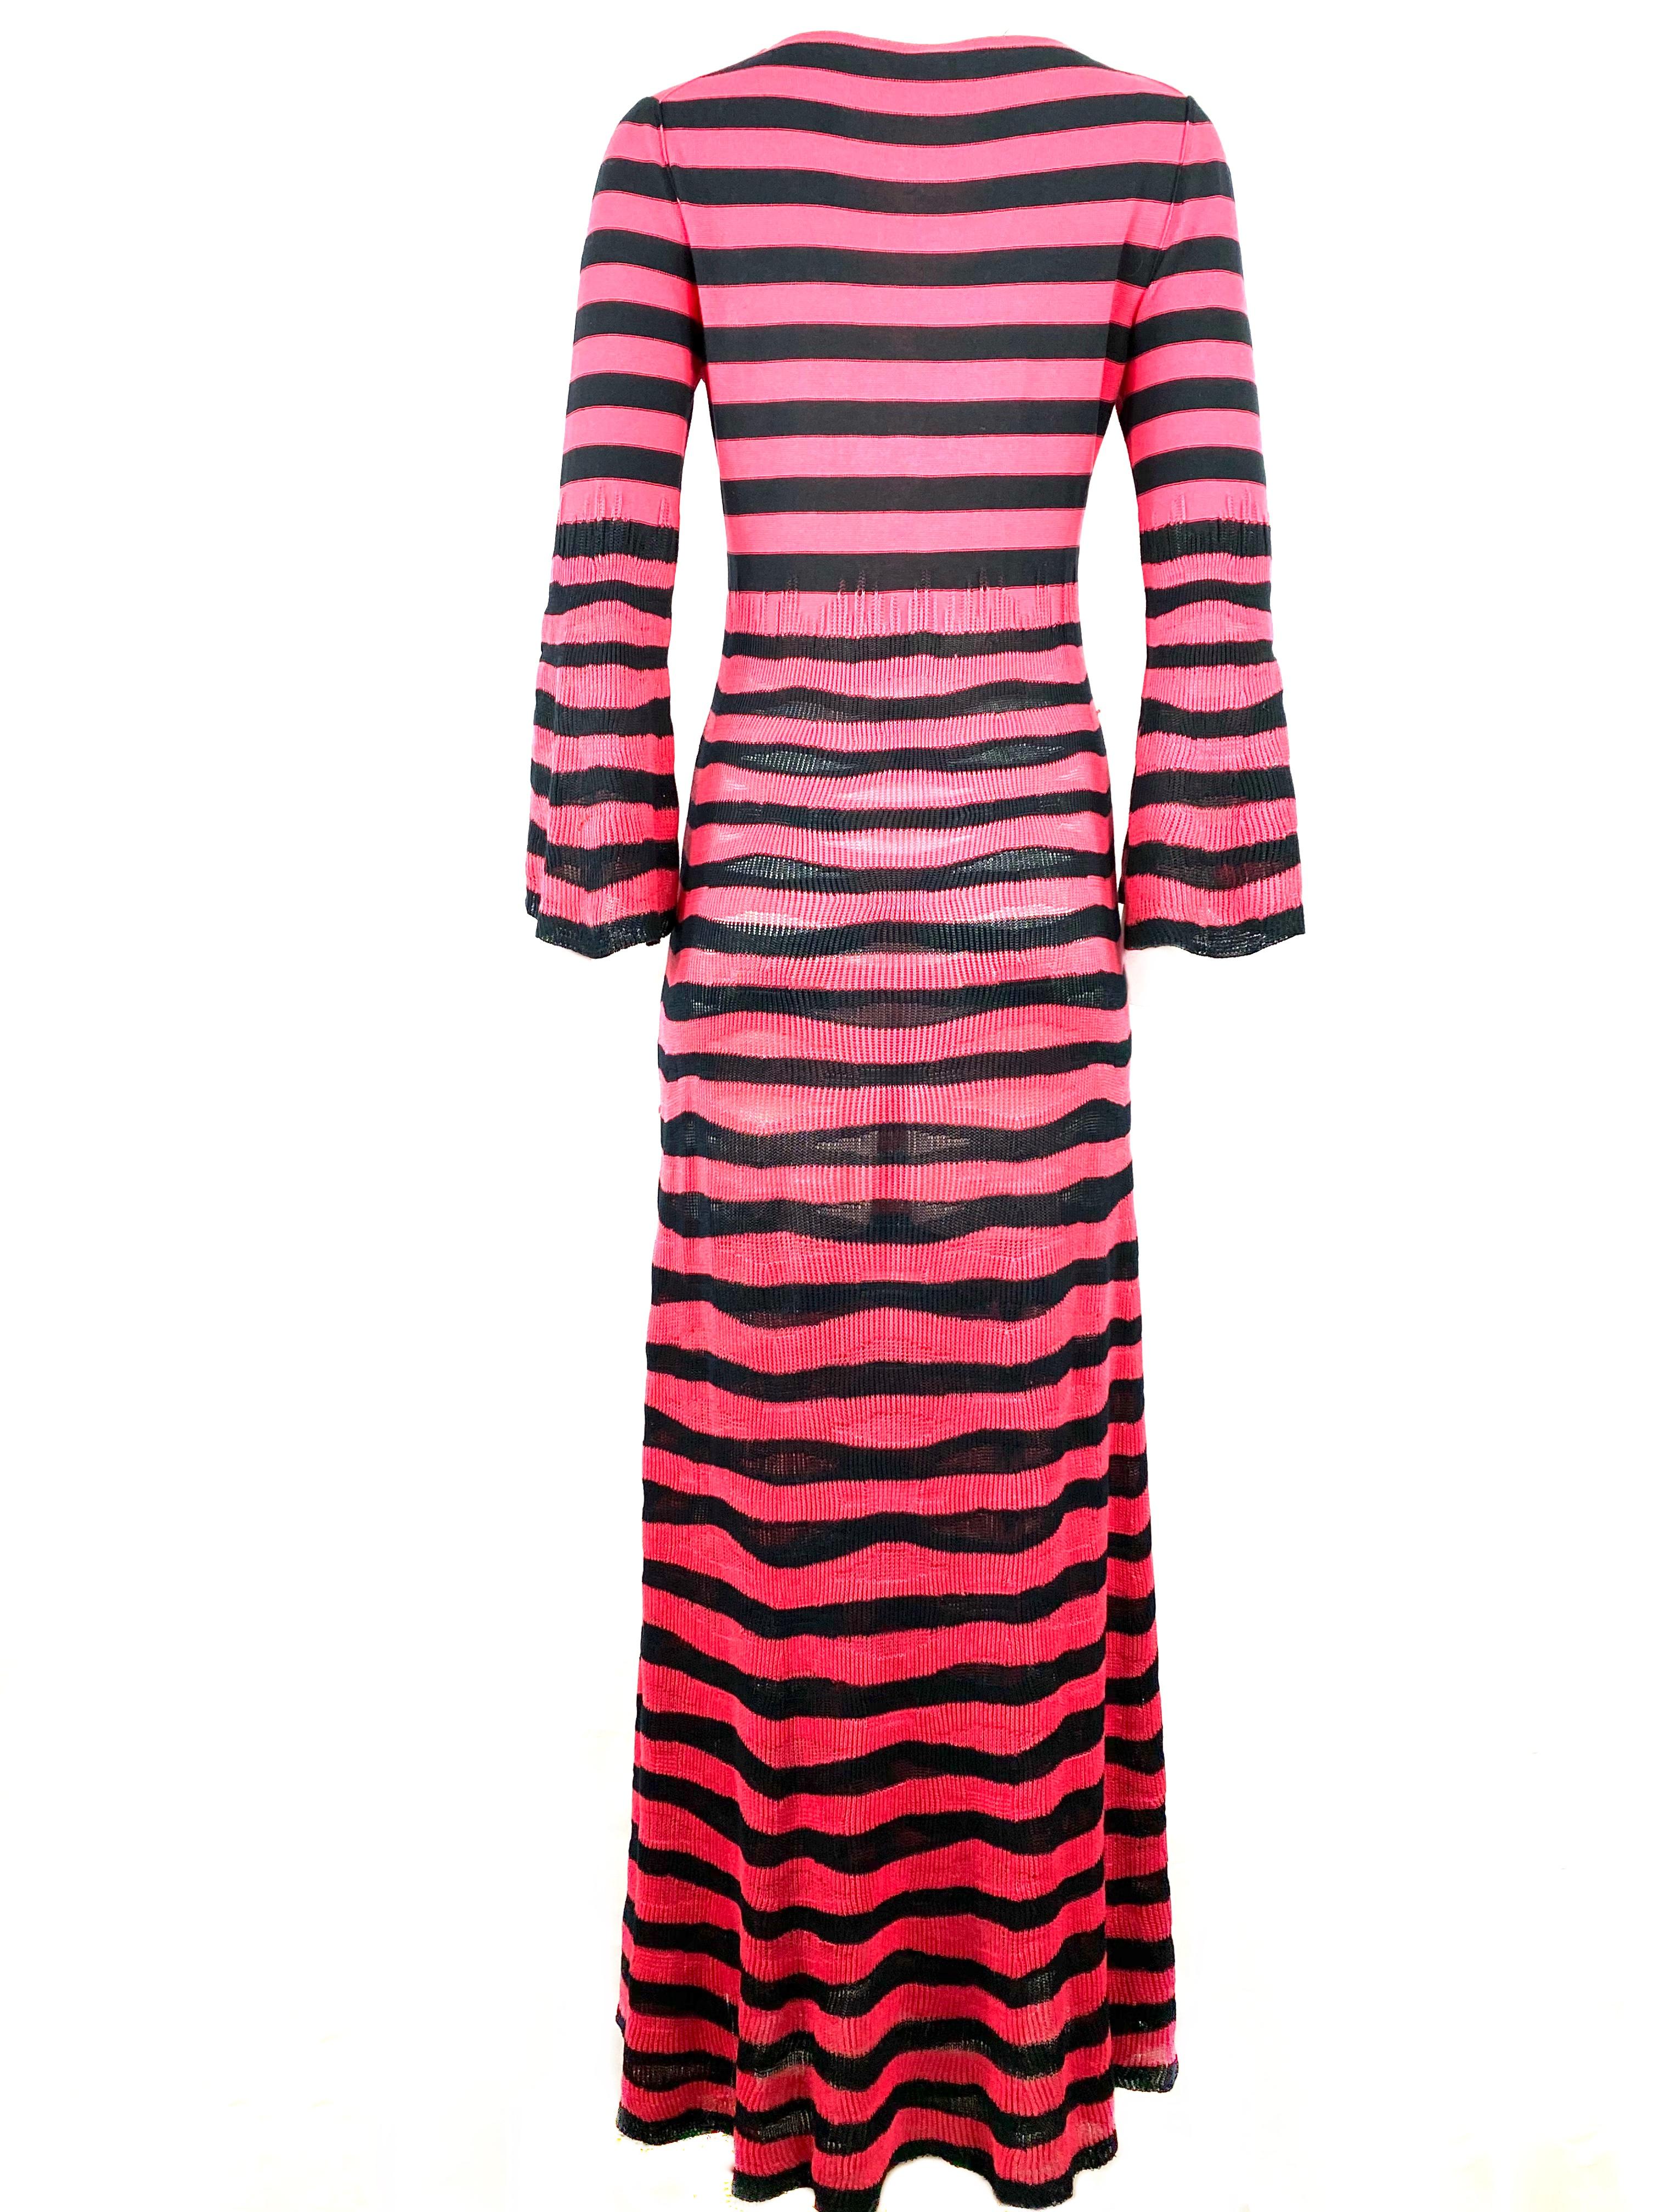 Sonia Rykiel Paris Pink and Navy Striped Maxi Dress w/ Flower Brooch Size 38 For Sale 3